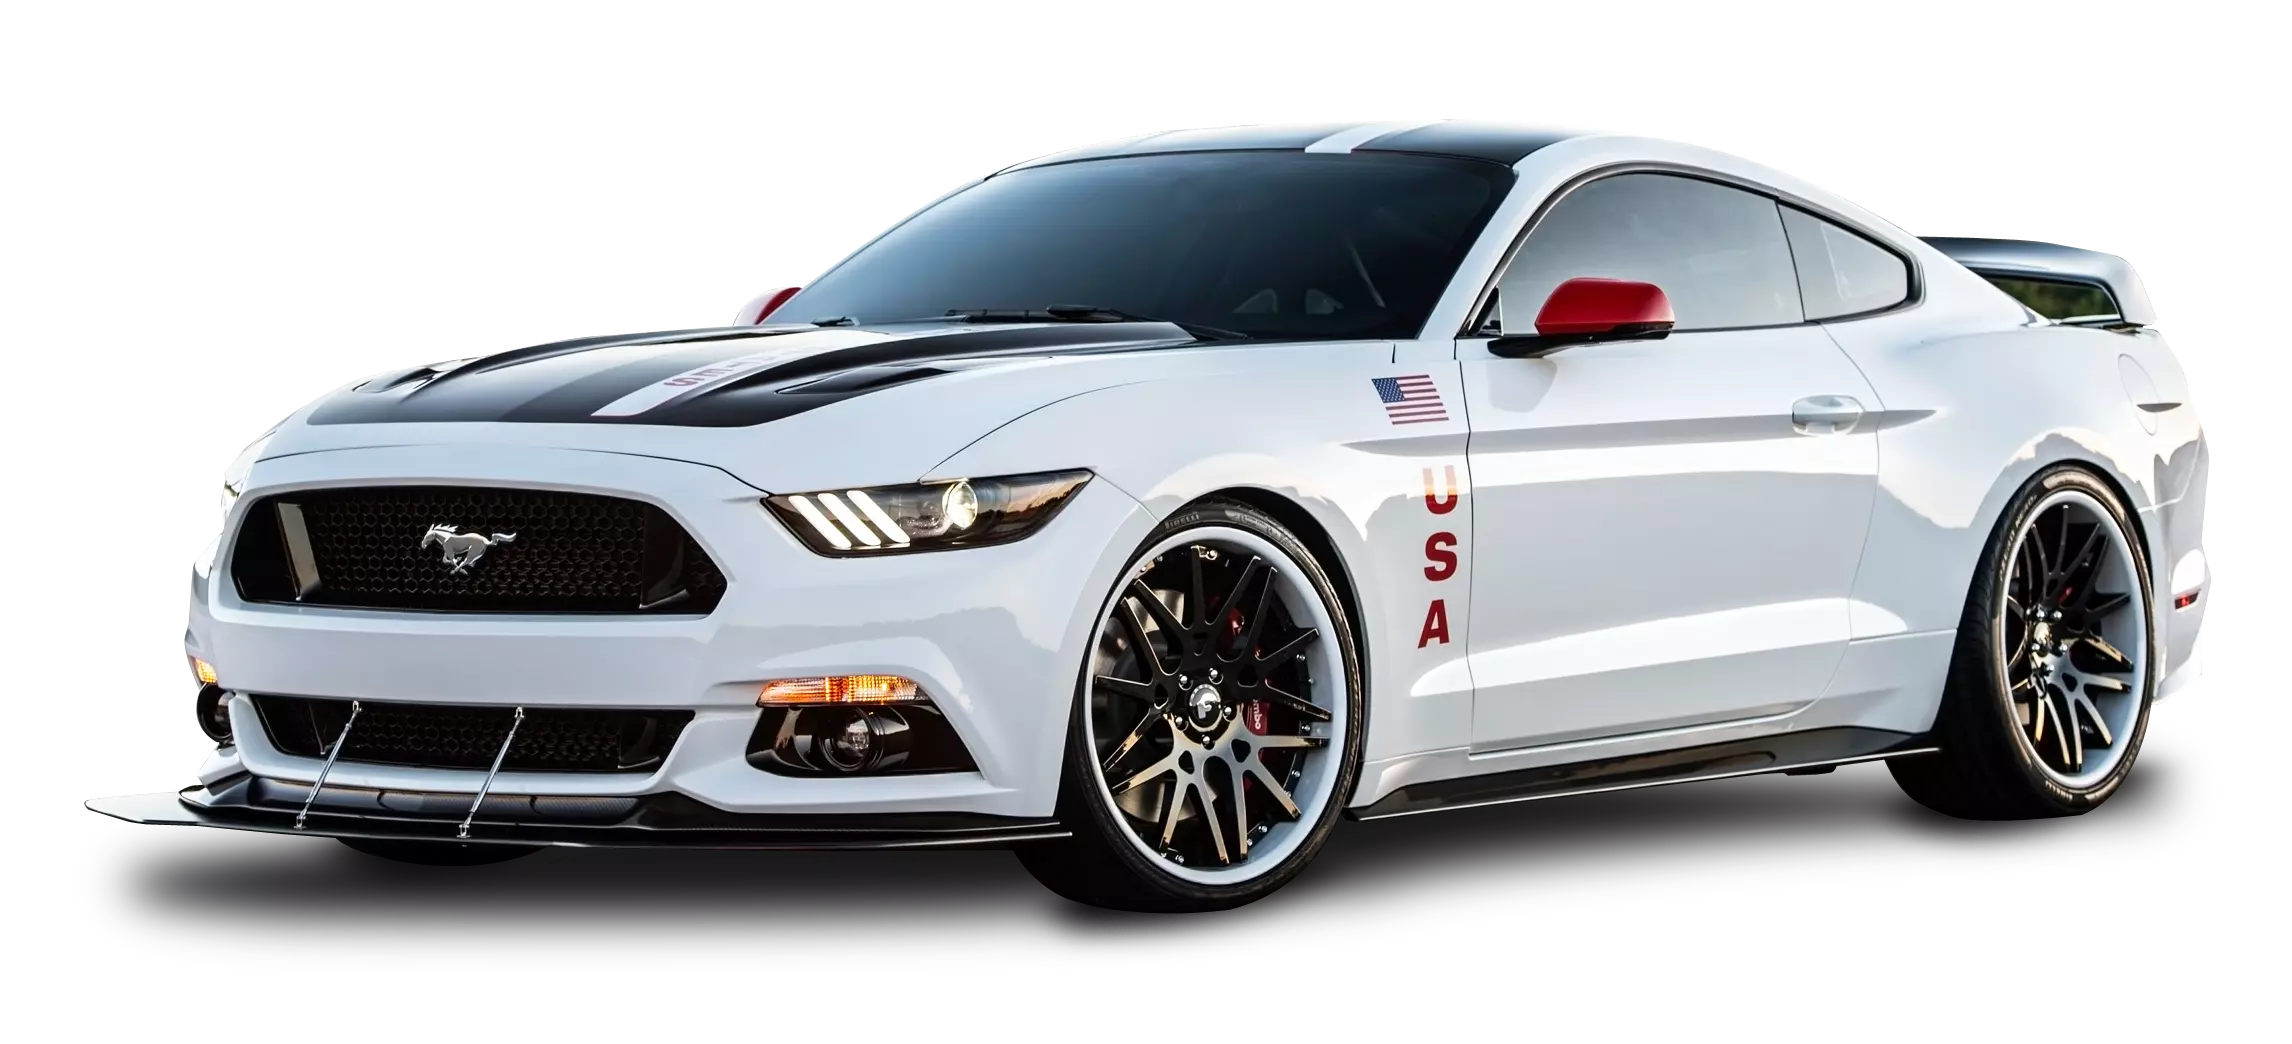 Illustration of a new white Ford Mustang sports car convertible.